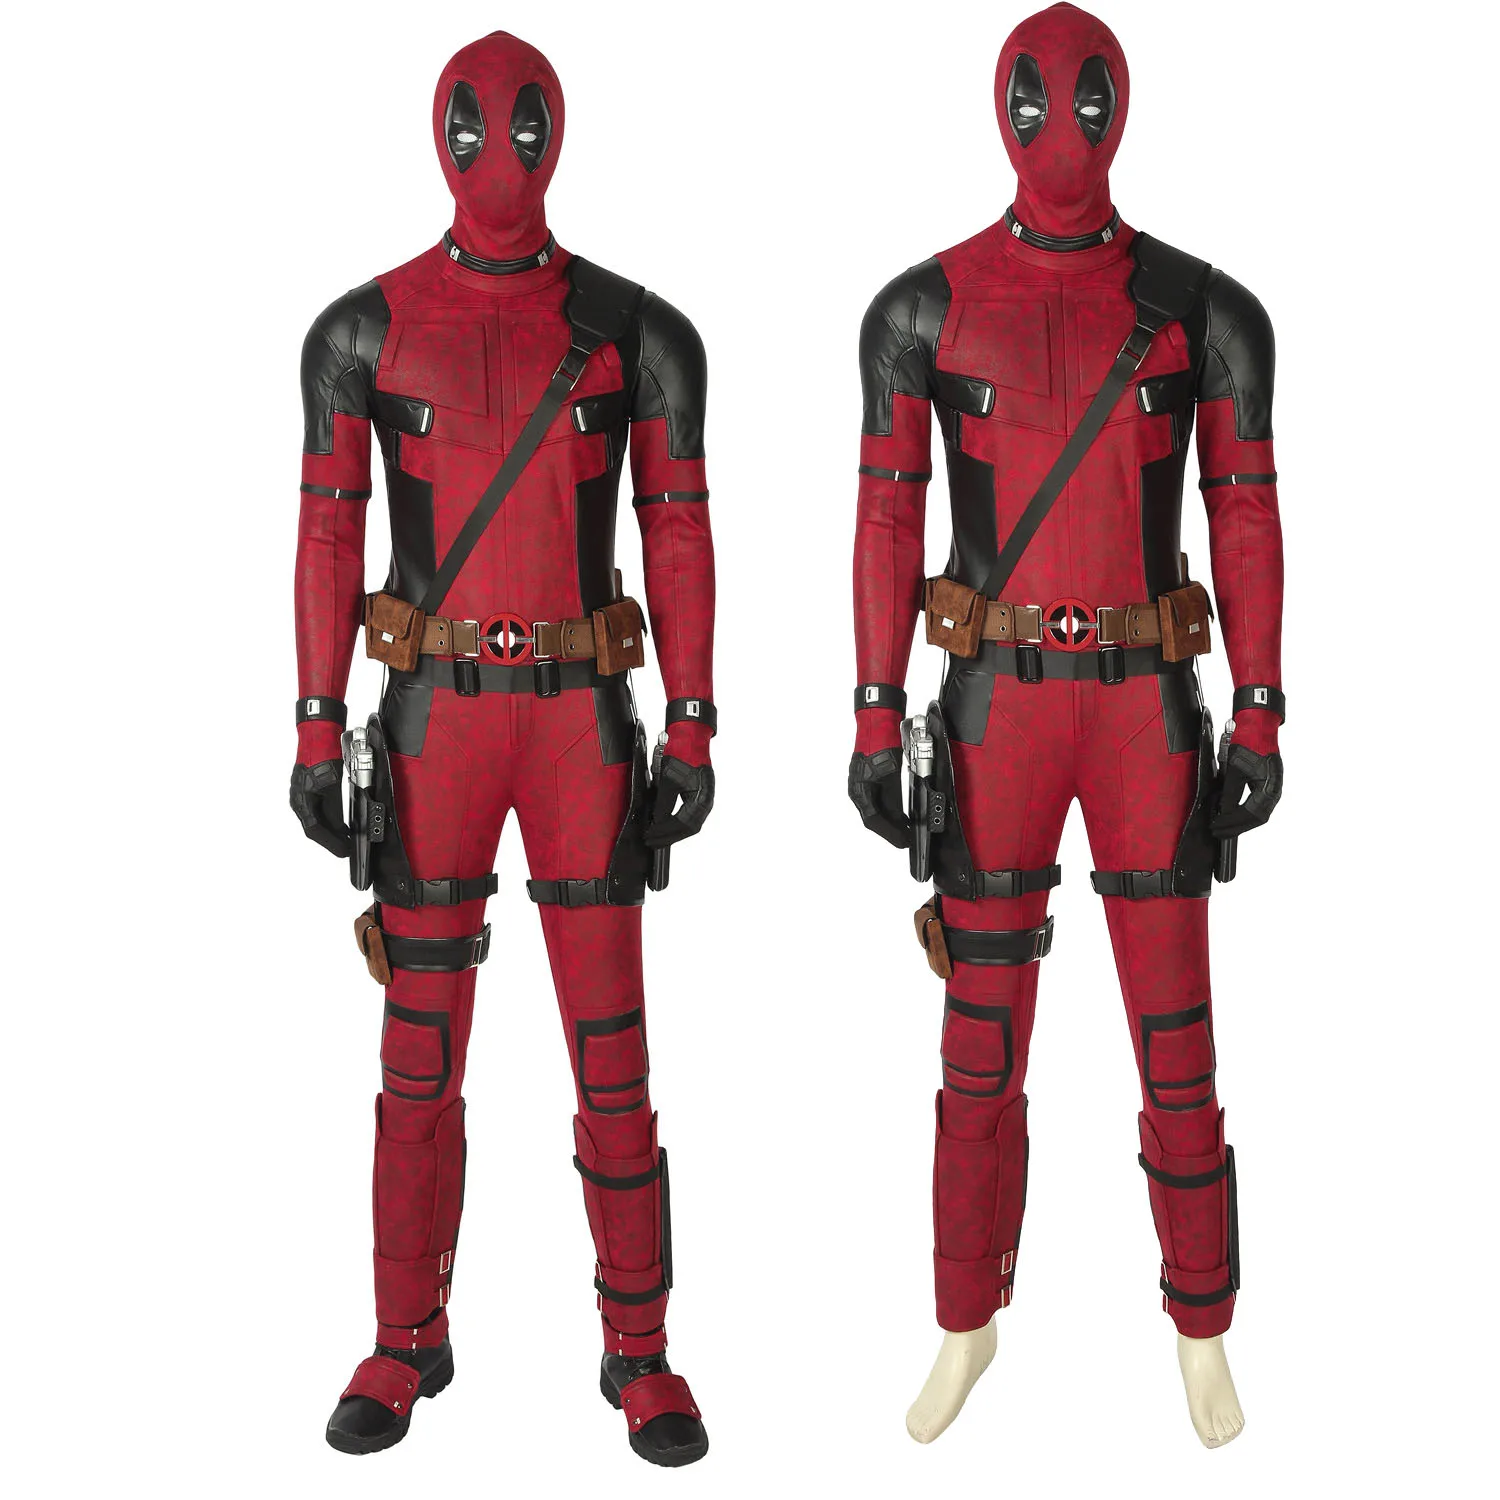 Dead Soldier Wade Jumpsuit Superhero Cosplay Costume Halloween Role-Playing Faux Leather Bodysuit Full Set With Accessories